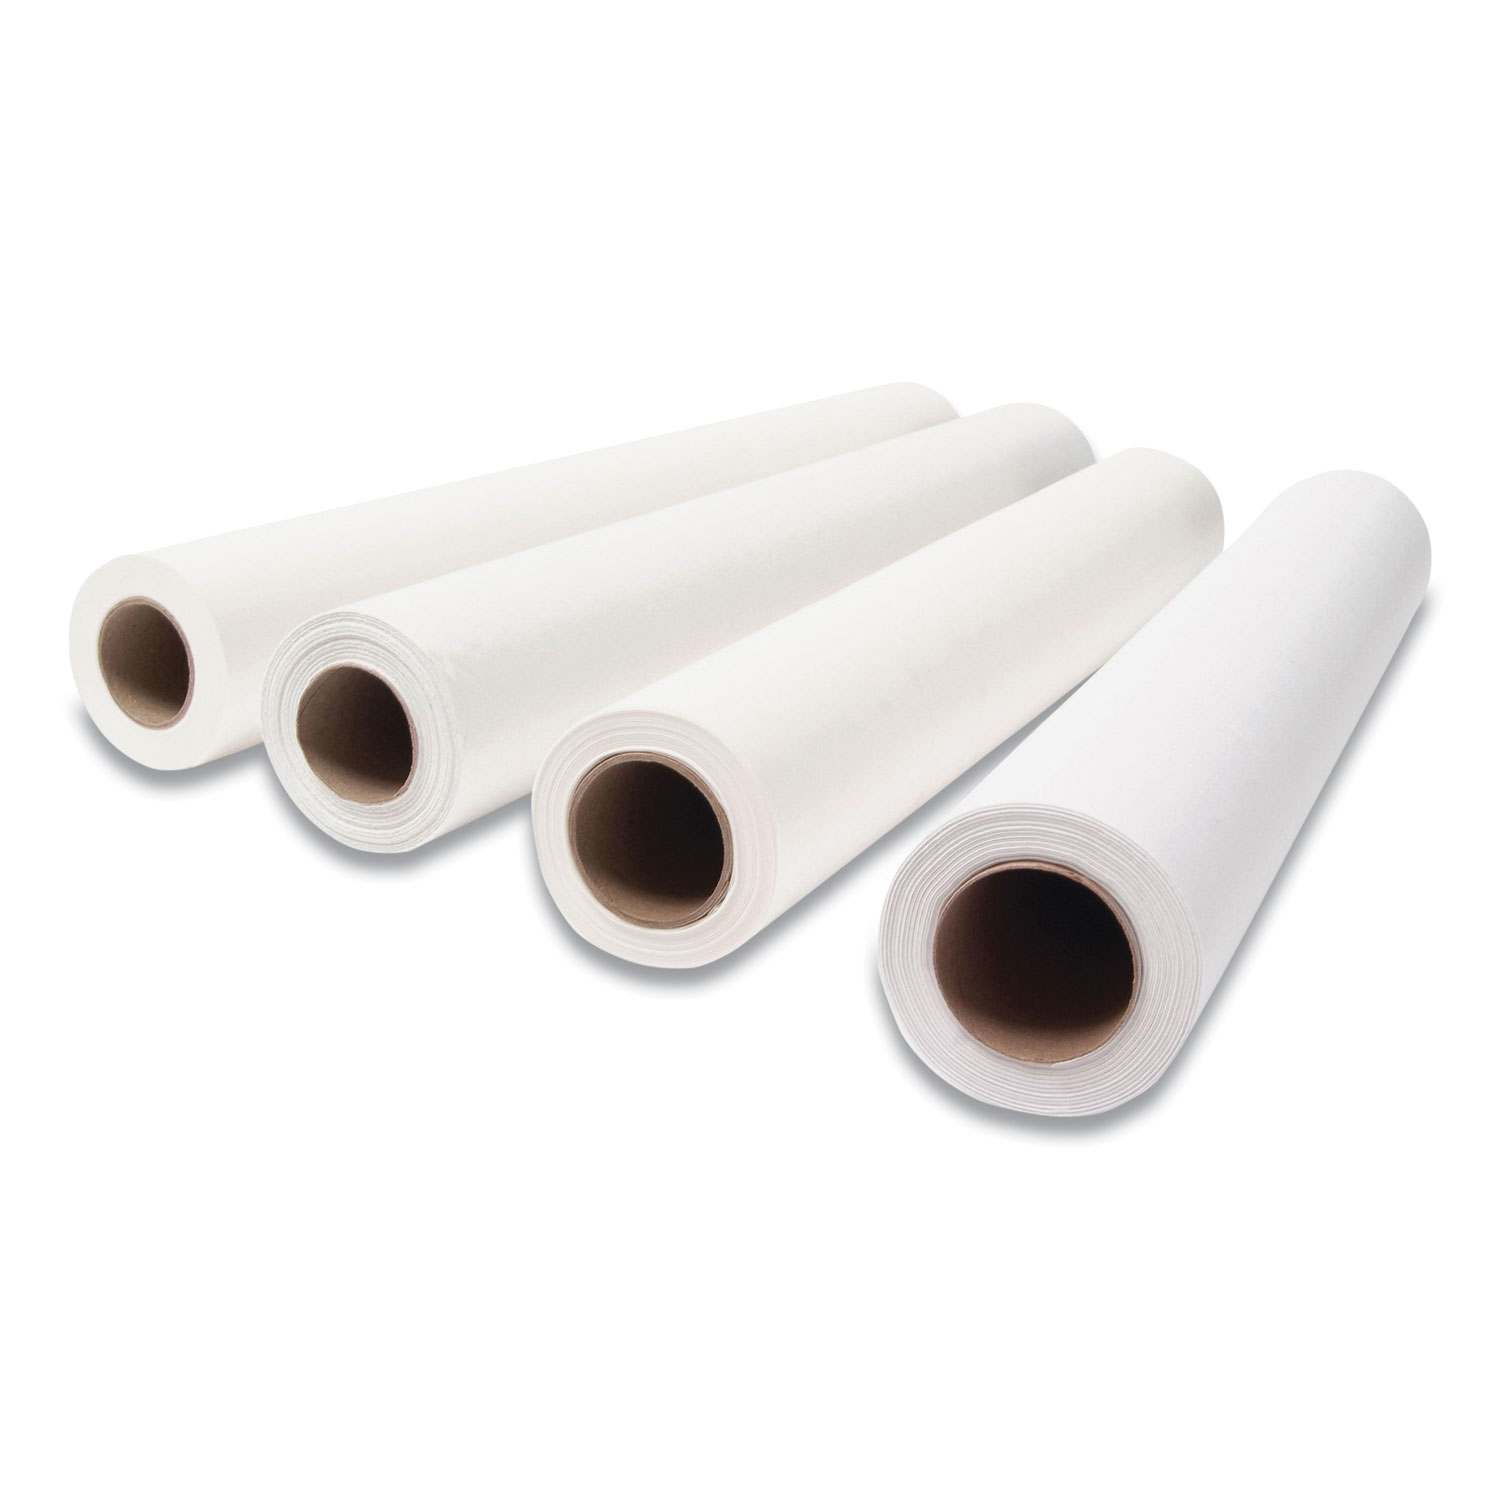  Medical Arts Press 513M Standard Exam Table Paper Roll, Smooth-Finish, 18 x 225 ft, White, 12/Carton (AVP815863) 